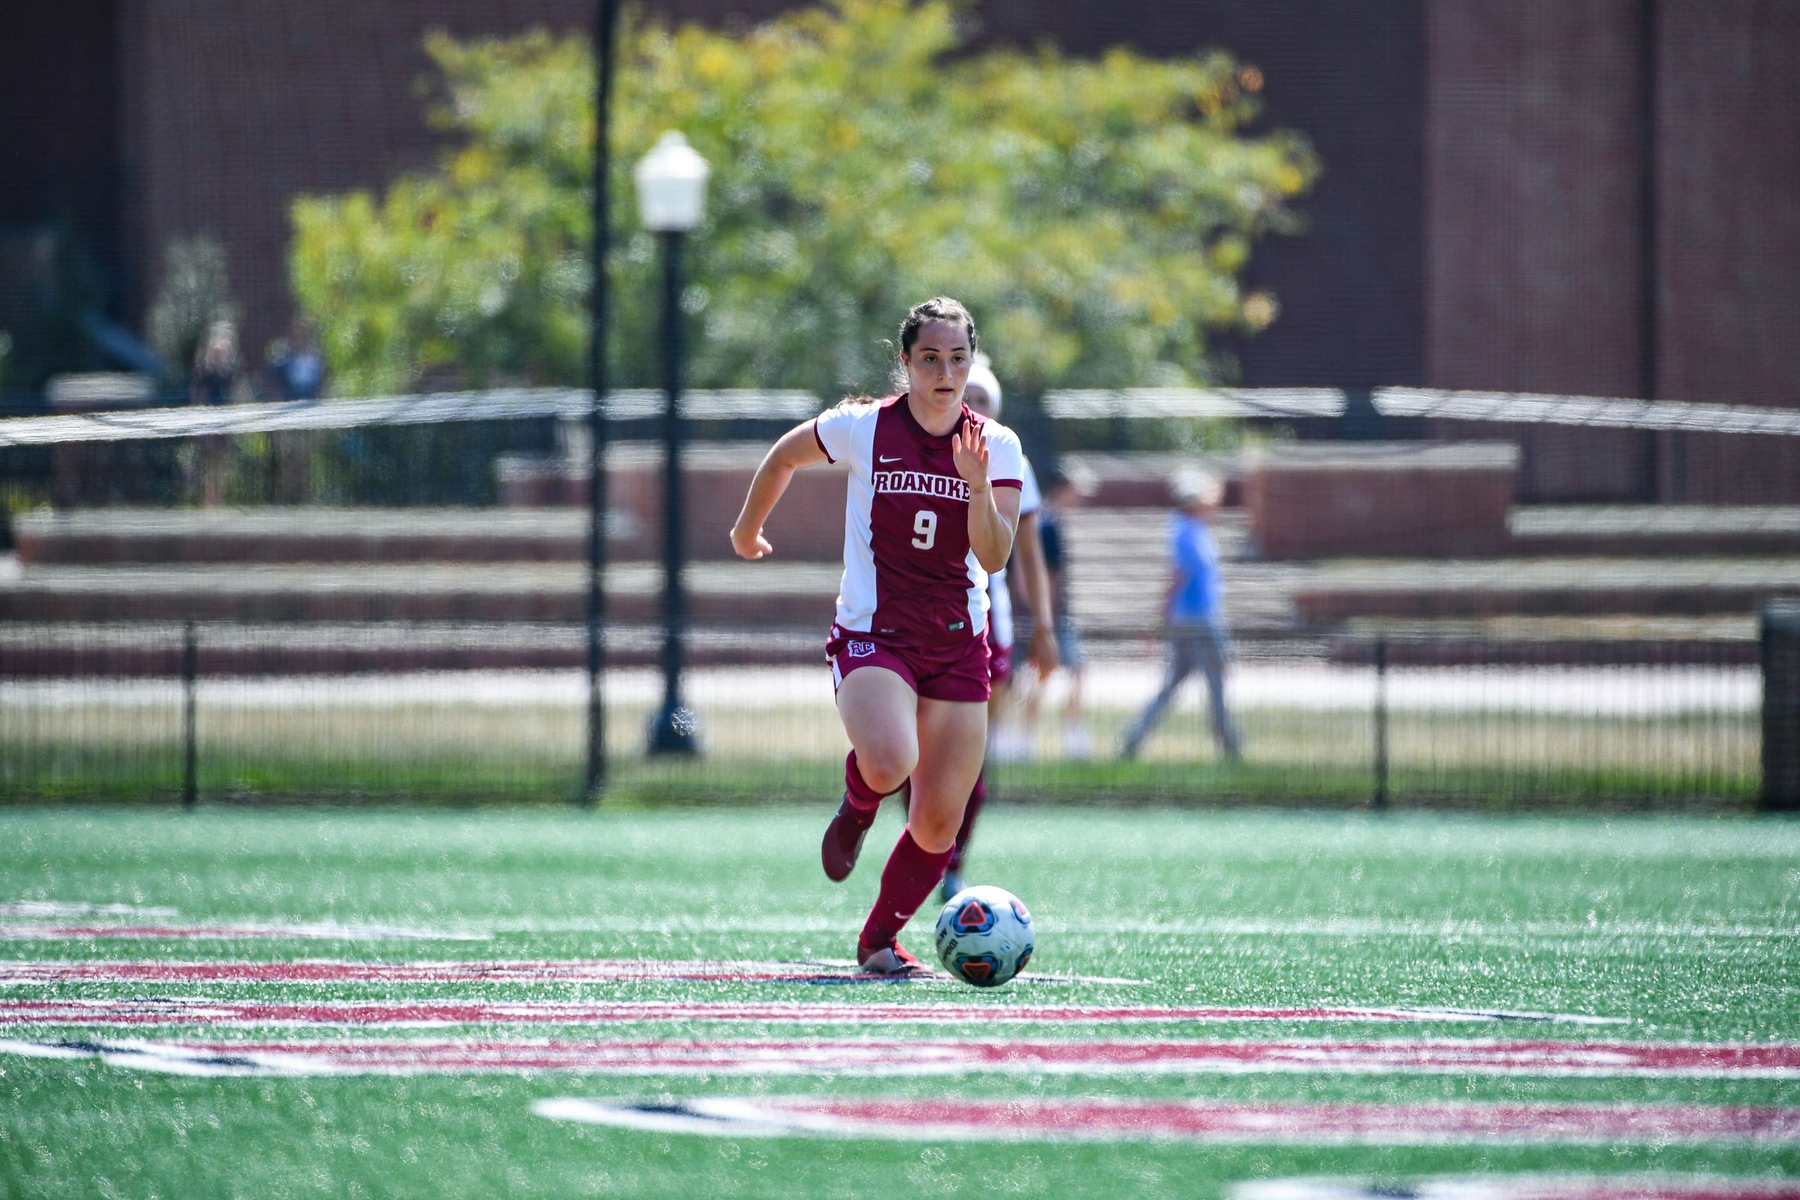 Roanoke earned a 1-0 ODAC road win at Guilford on Wednesday.